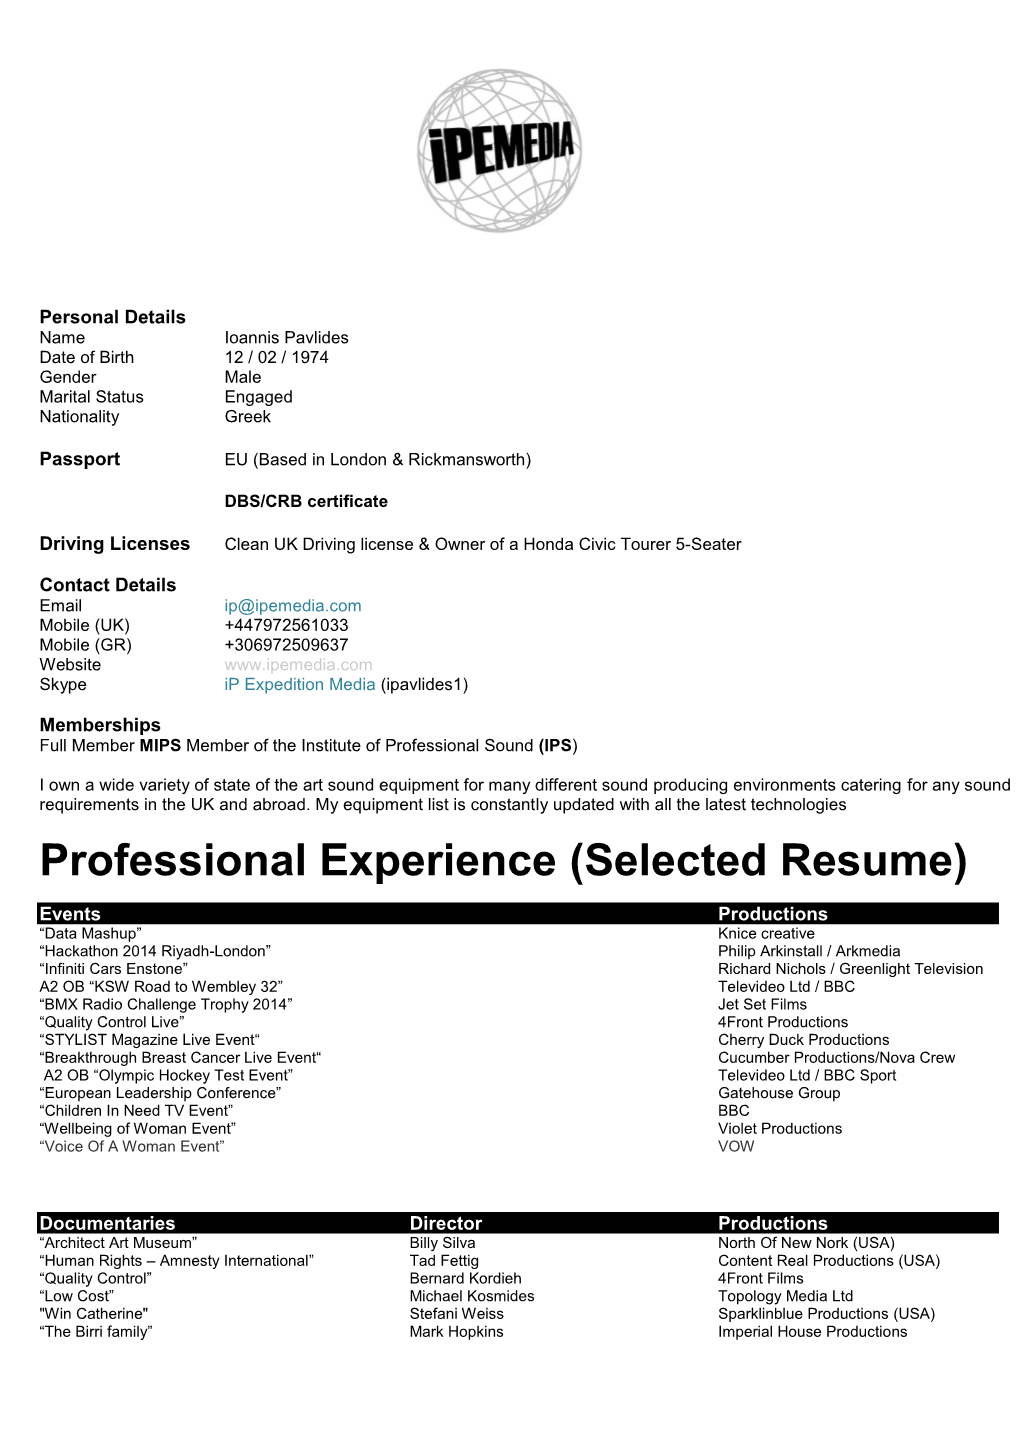 Professional Experience (Selected Resume)